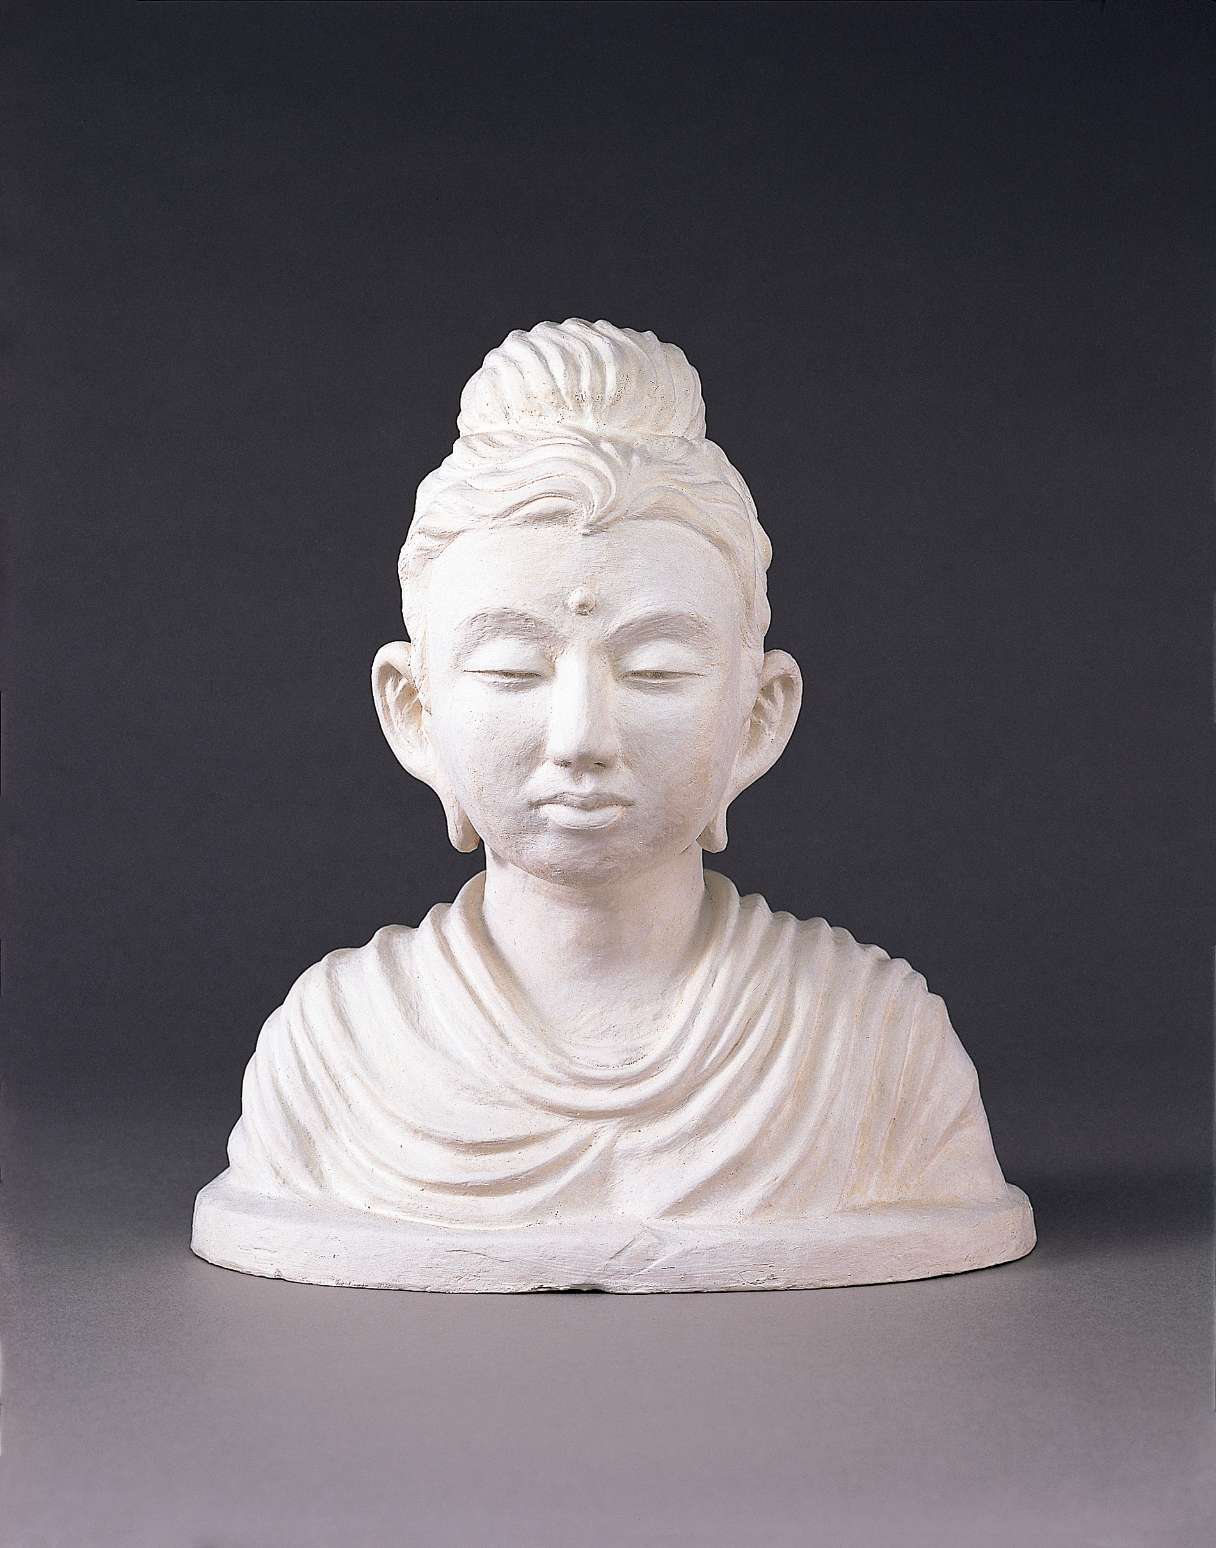 A white plaster bust of Buddha with a plump, youthful face, eyes slightly closed in meditation; the strands of his hair and drapery of his robes form a pleasing wavelike pattern.